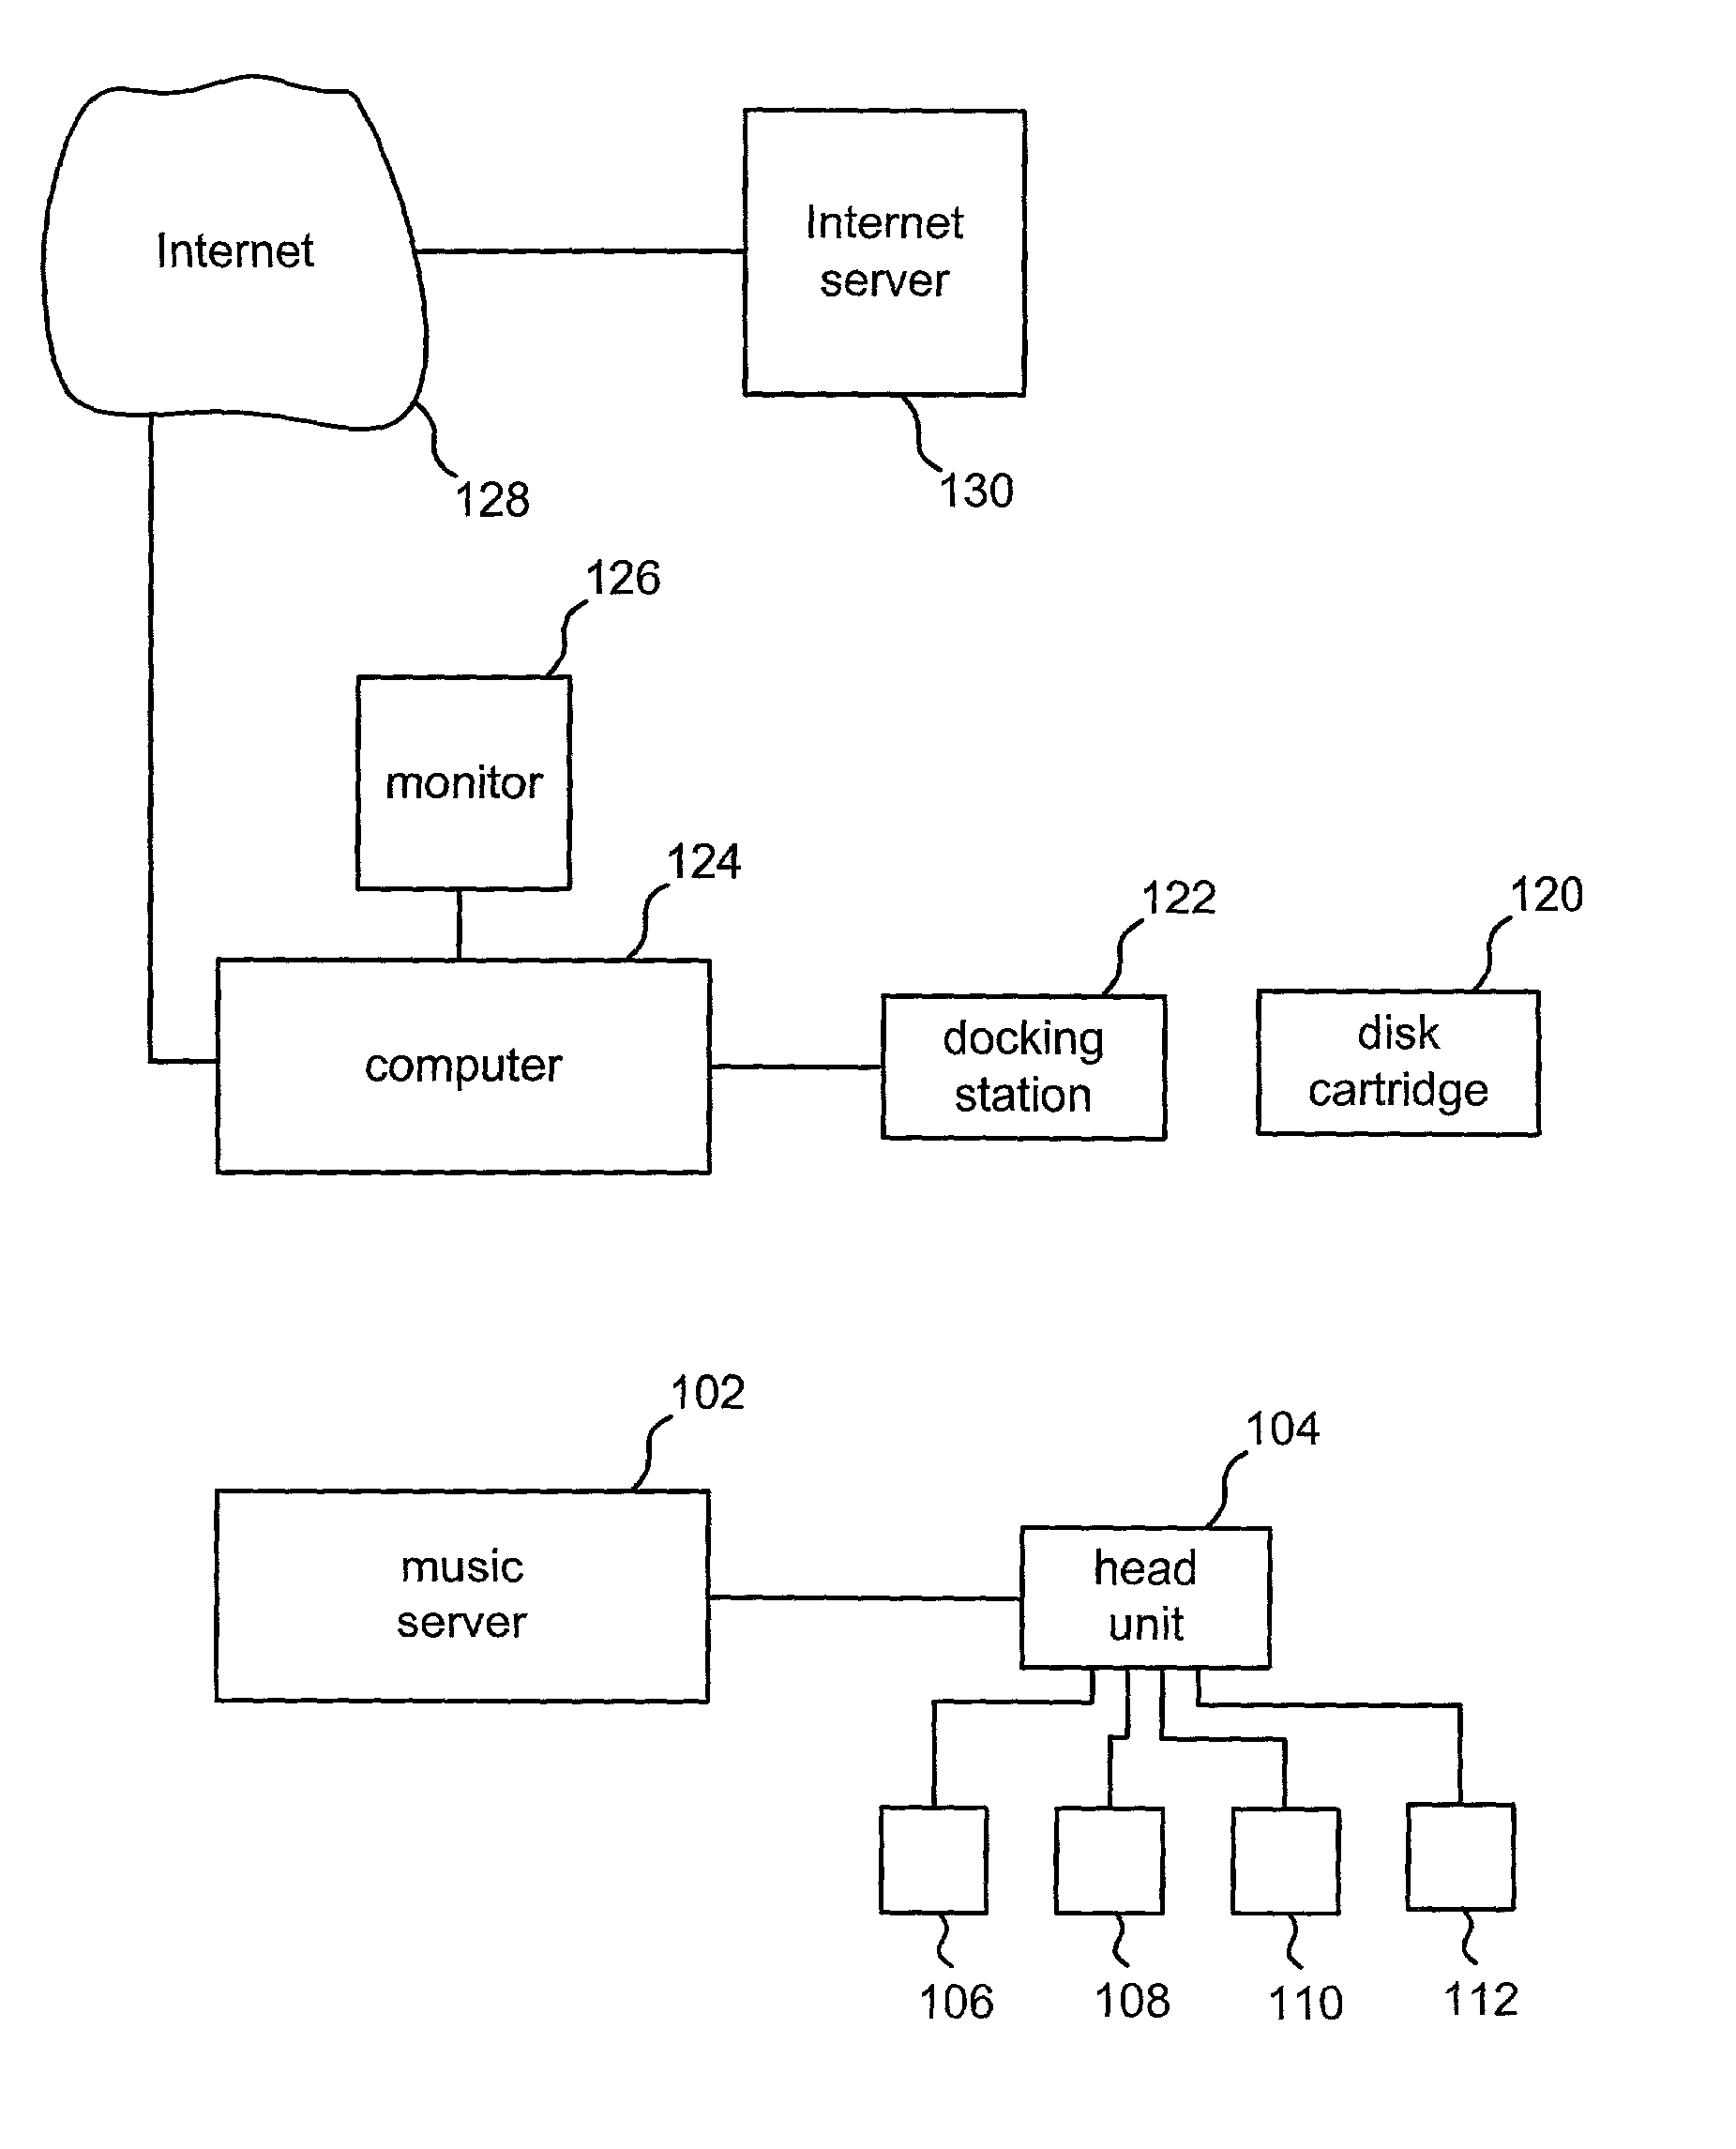 Interface for audio visual device